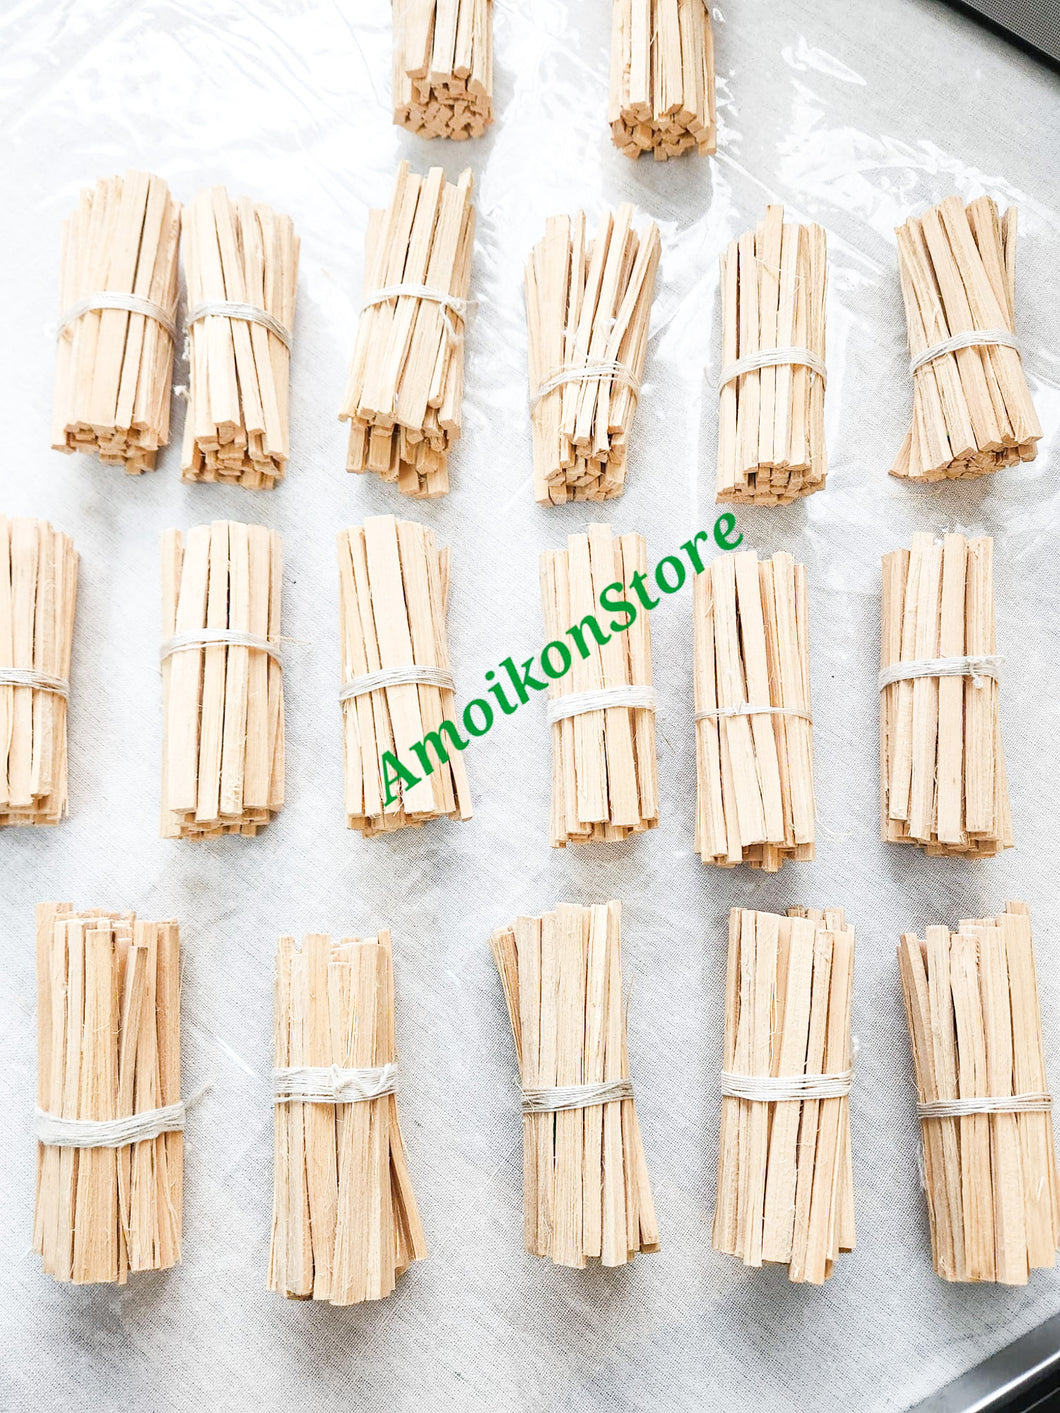 African Natural Chewing sticks